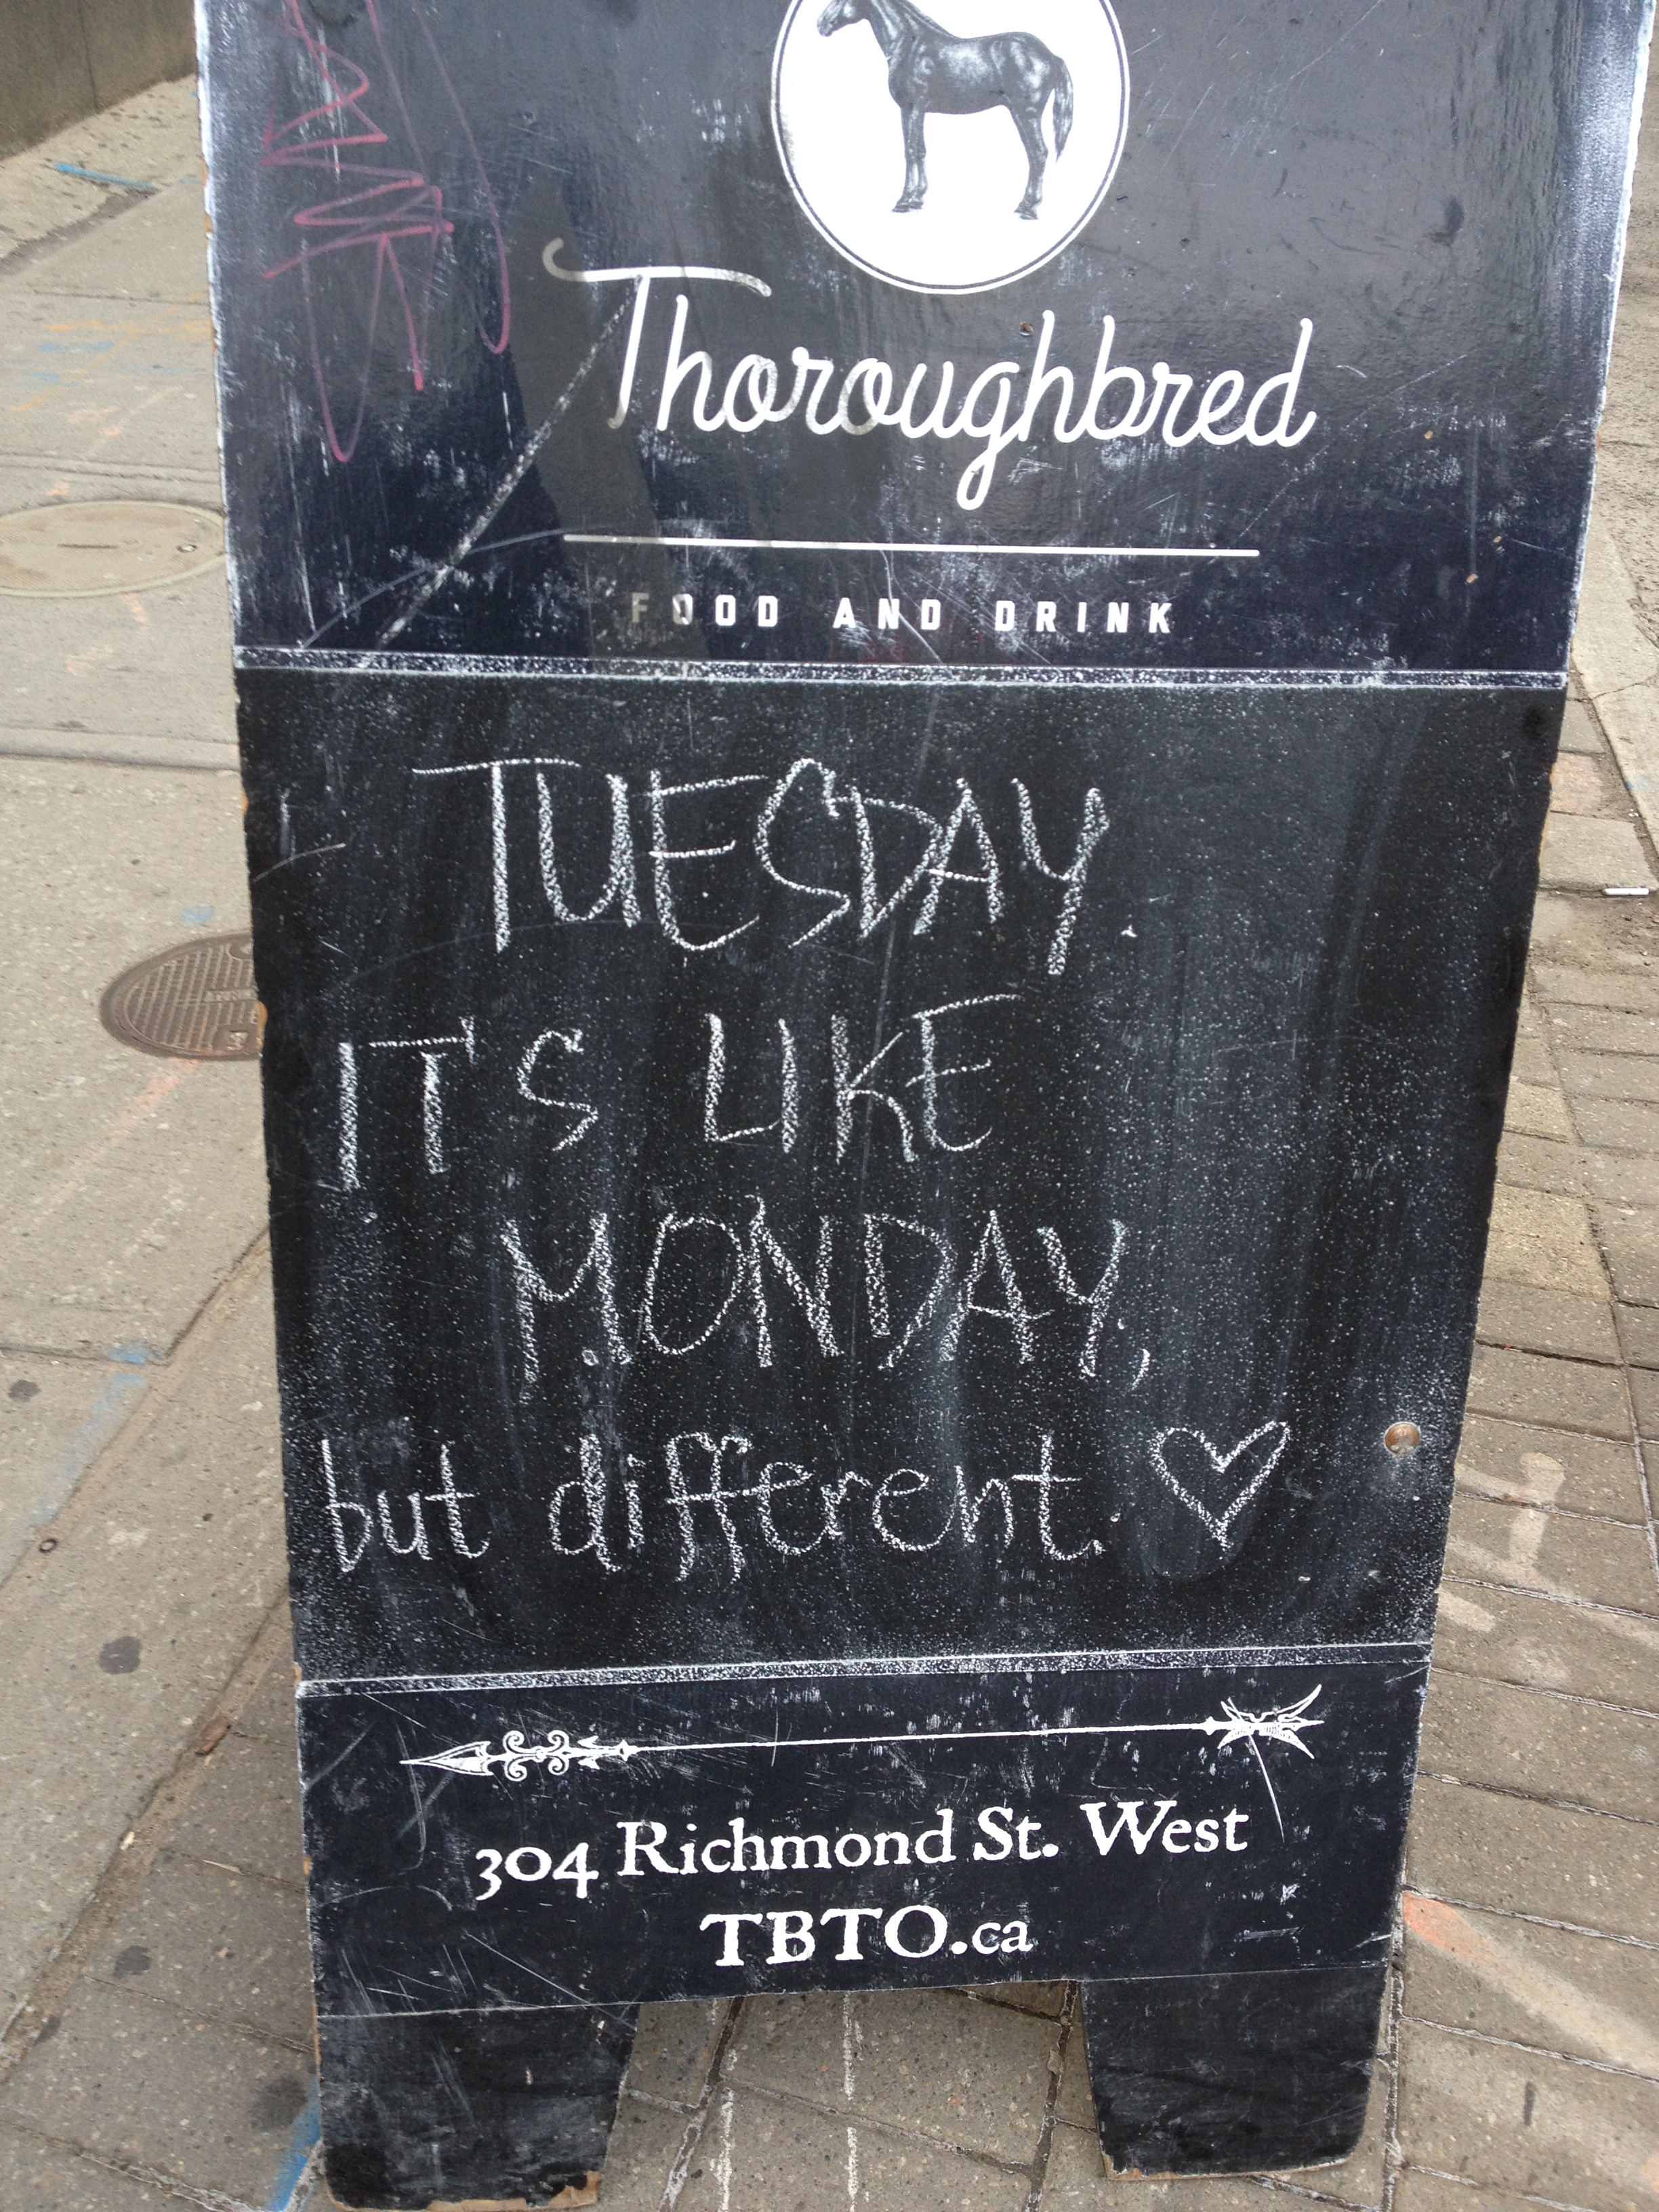 Pub roadside sign saying “Tuesday. It's like Monday, but different. ♡”